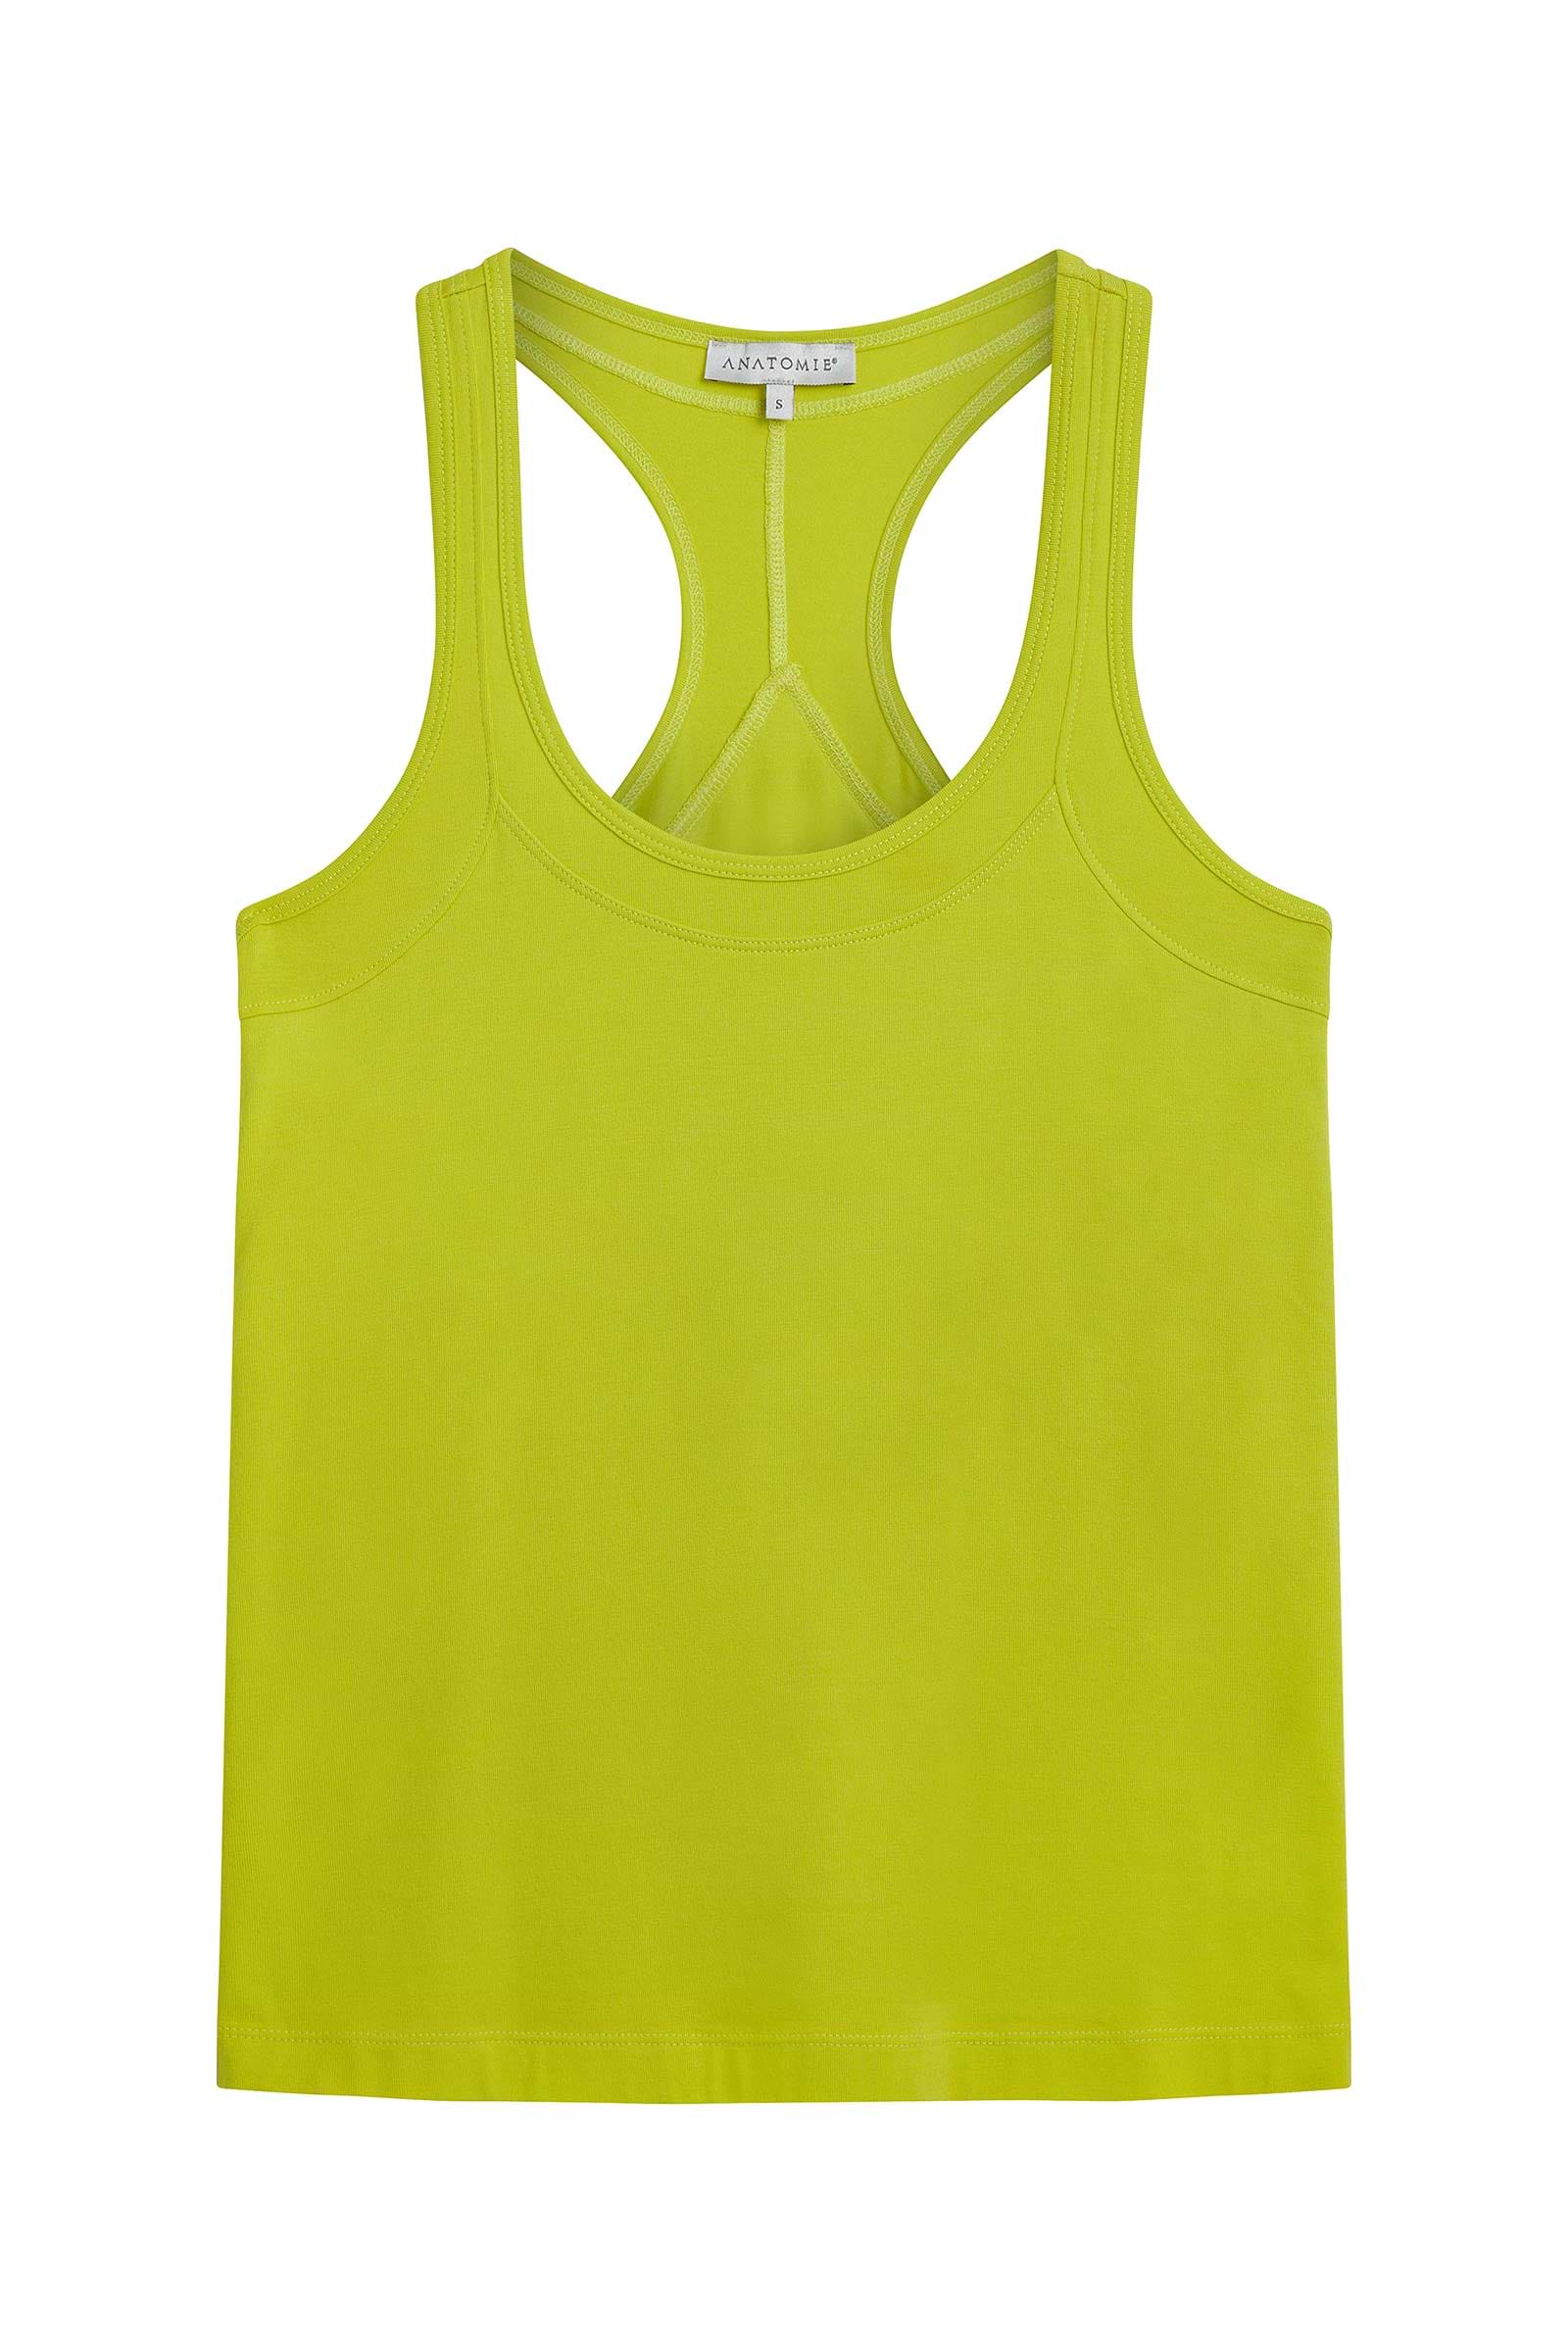 The Best Travel Tops. Flay Lay of an Emani Tank in Citrus Yellow.